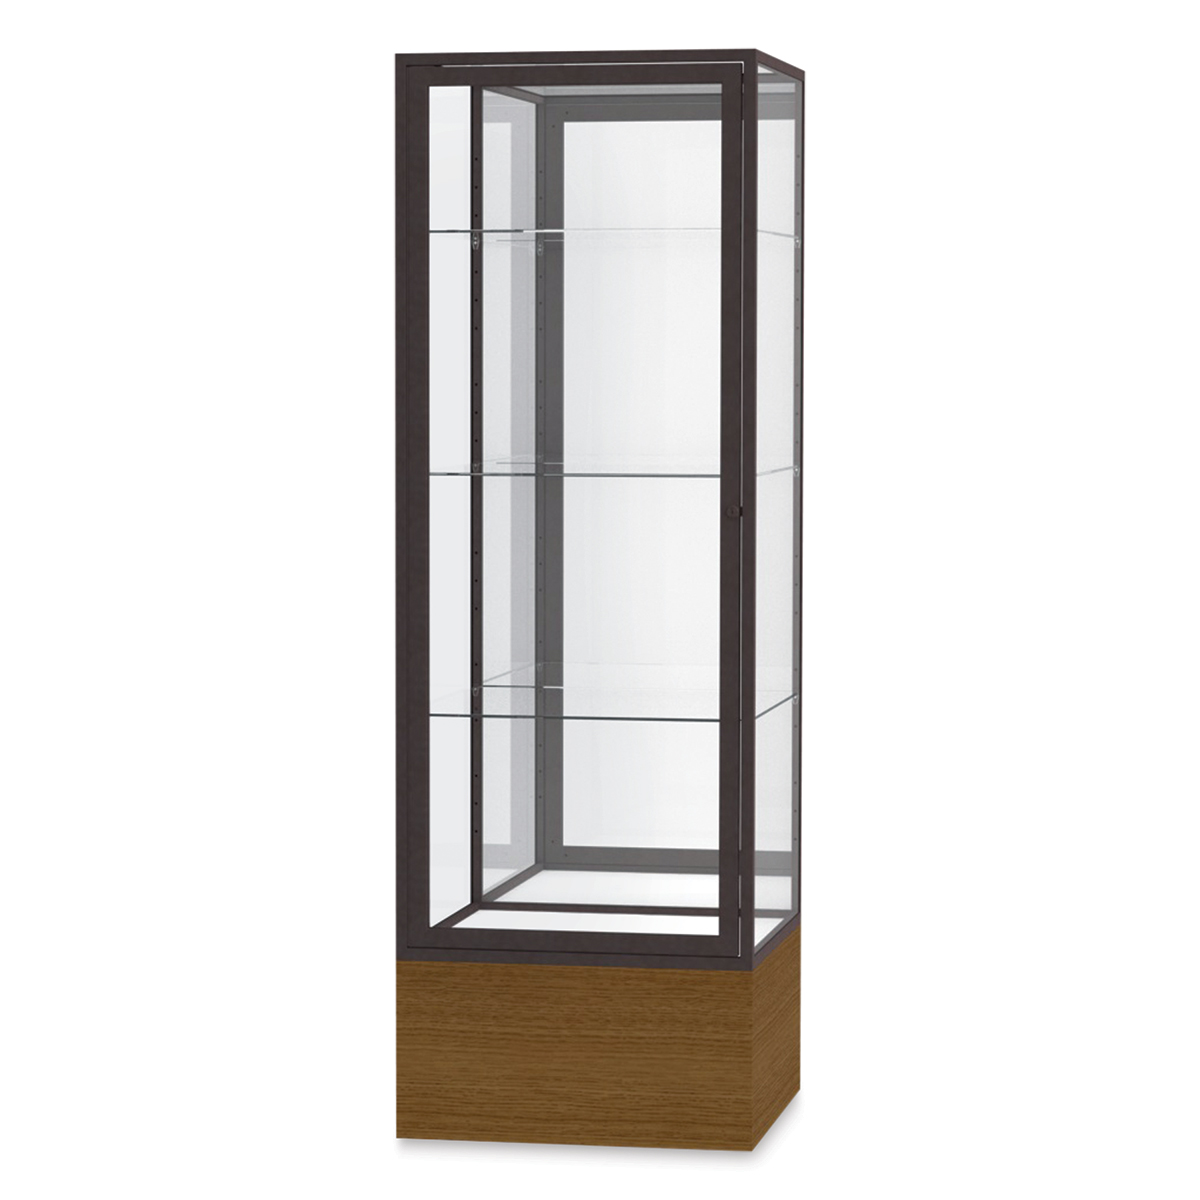 Waddell Keepsake Series Display Case (48'' L x 24'' D - Hinged top) -  3148HT, Retail & Counter-Height Display Cases